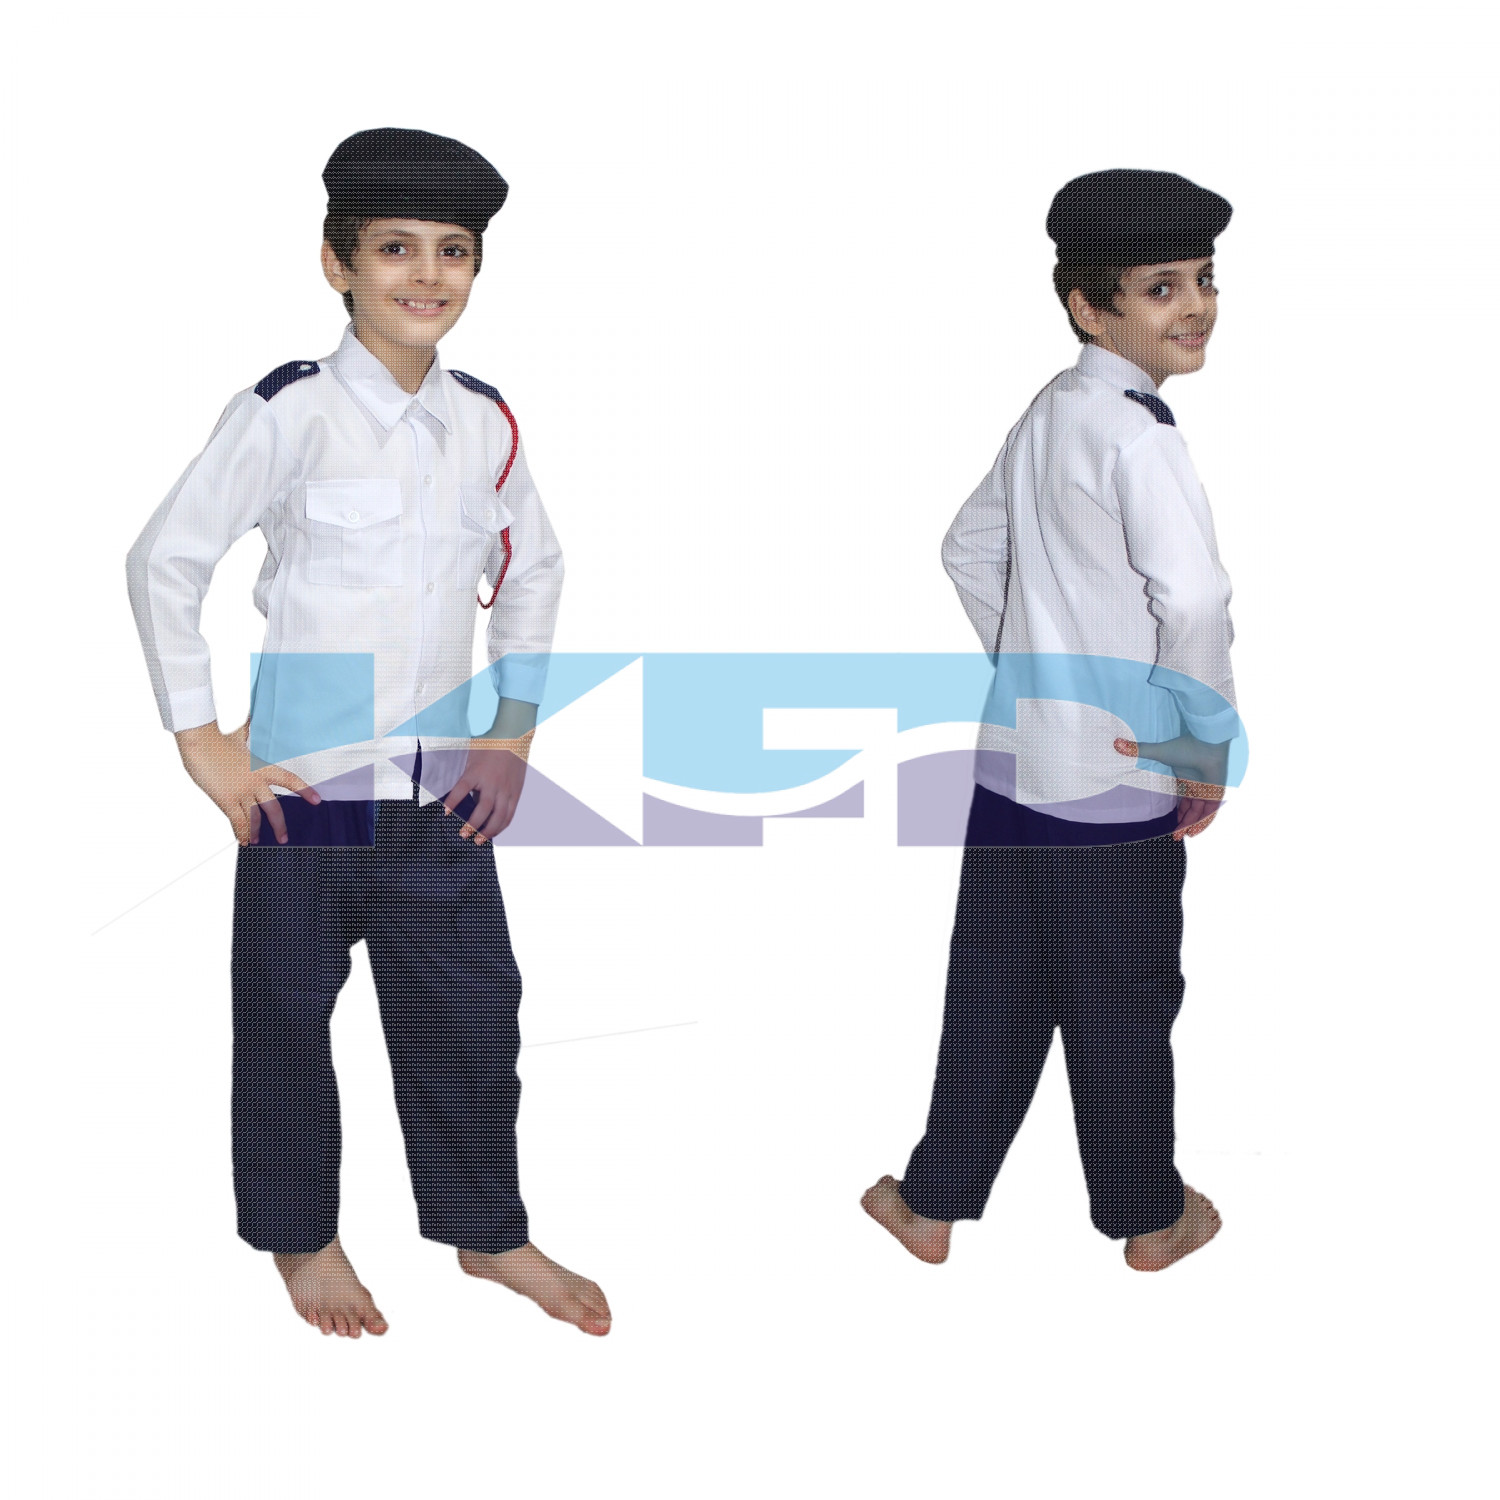 Trafic Police Fancy Dress For Kids,Our Helper Costume For Annual Function/Theme Party/Competition/Stage Shows Dress